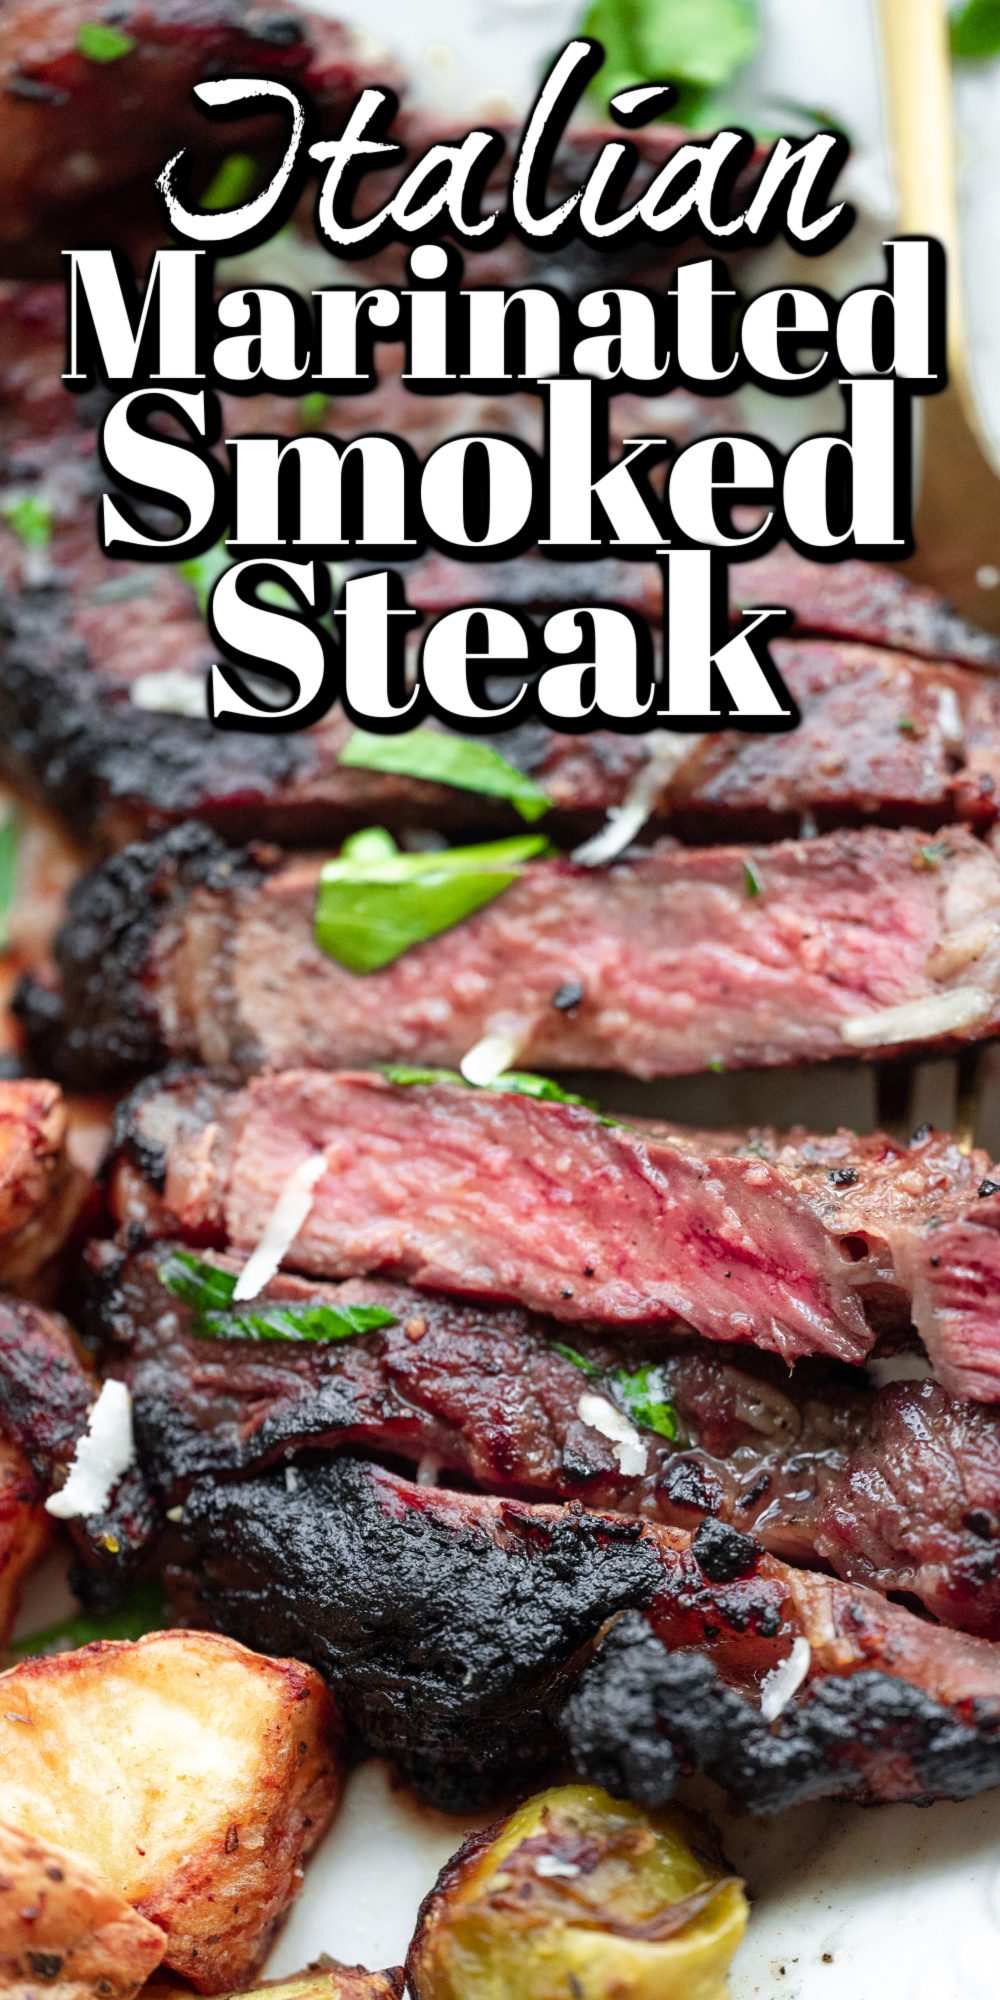 These Italian marinated smoke steaks are as easy to prepare as they are tasty. Perfect for an elegant dinner or a weeknight meal!